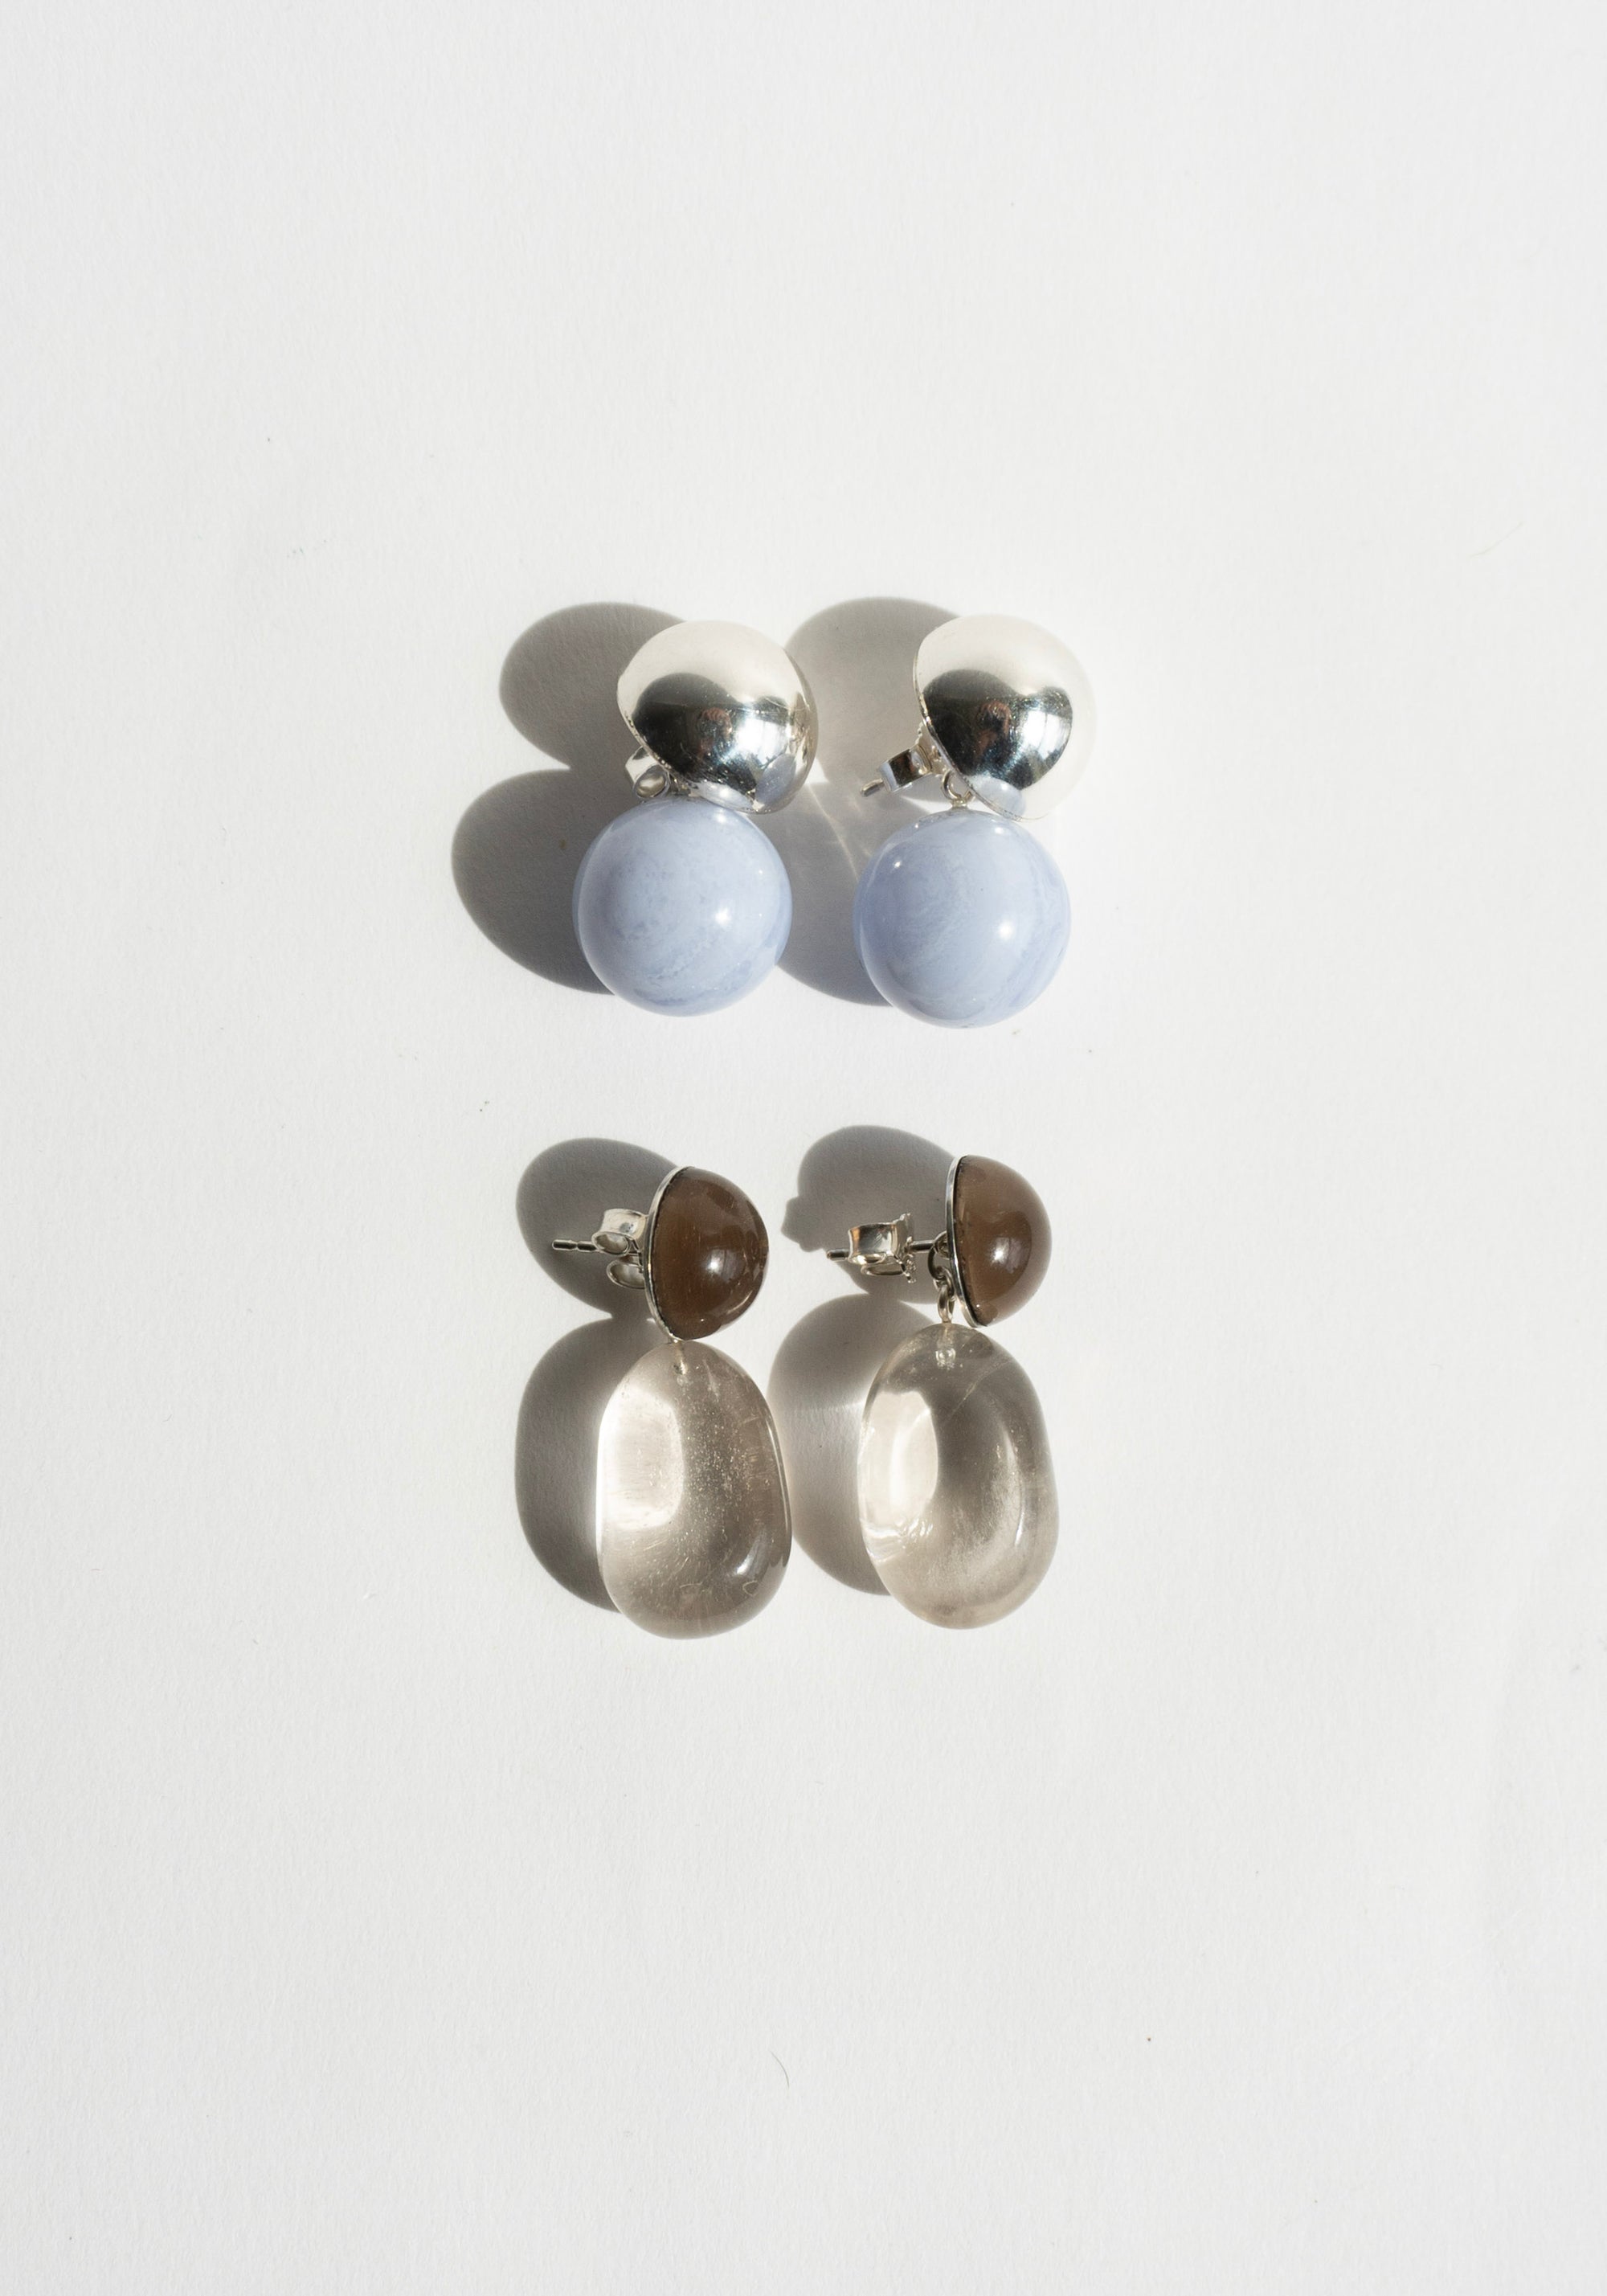 Mussels and Muscles Smoky Pebbles Earrings No.1